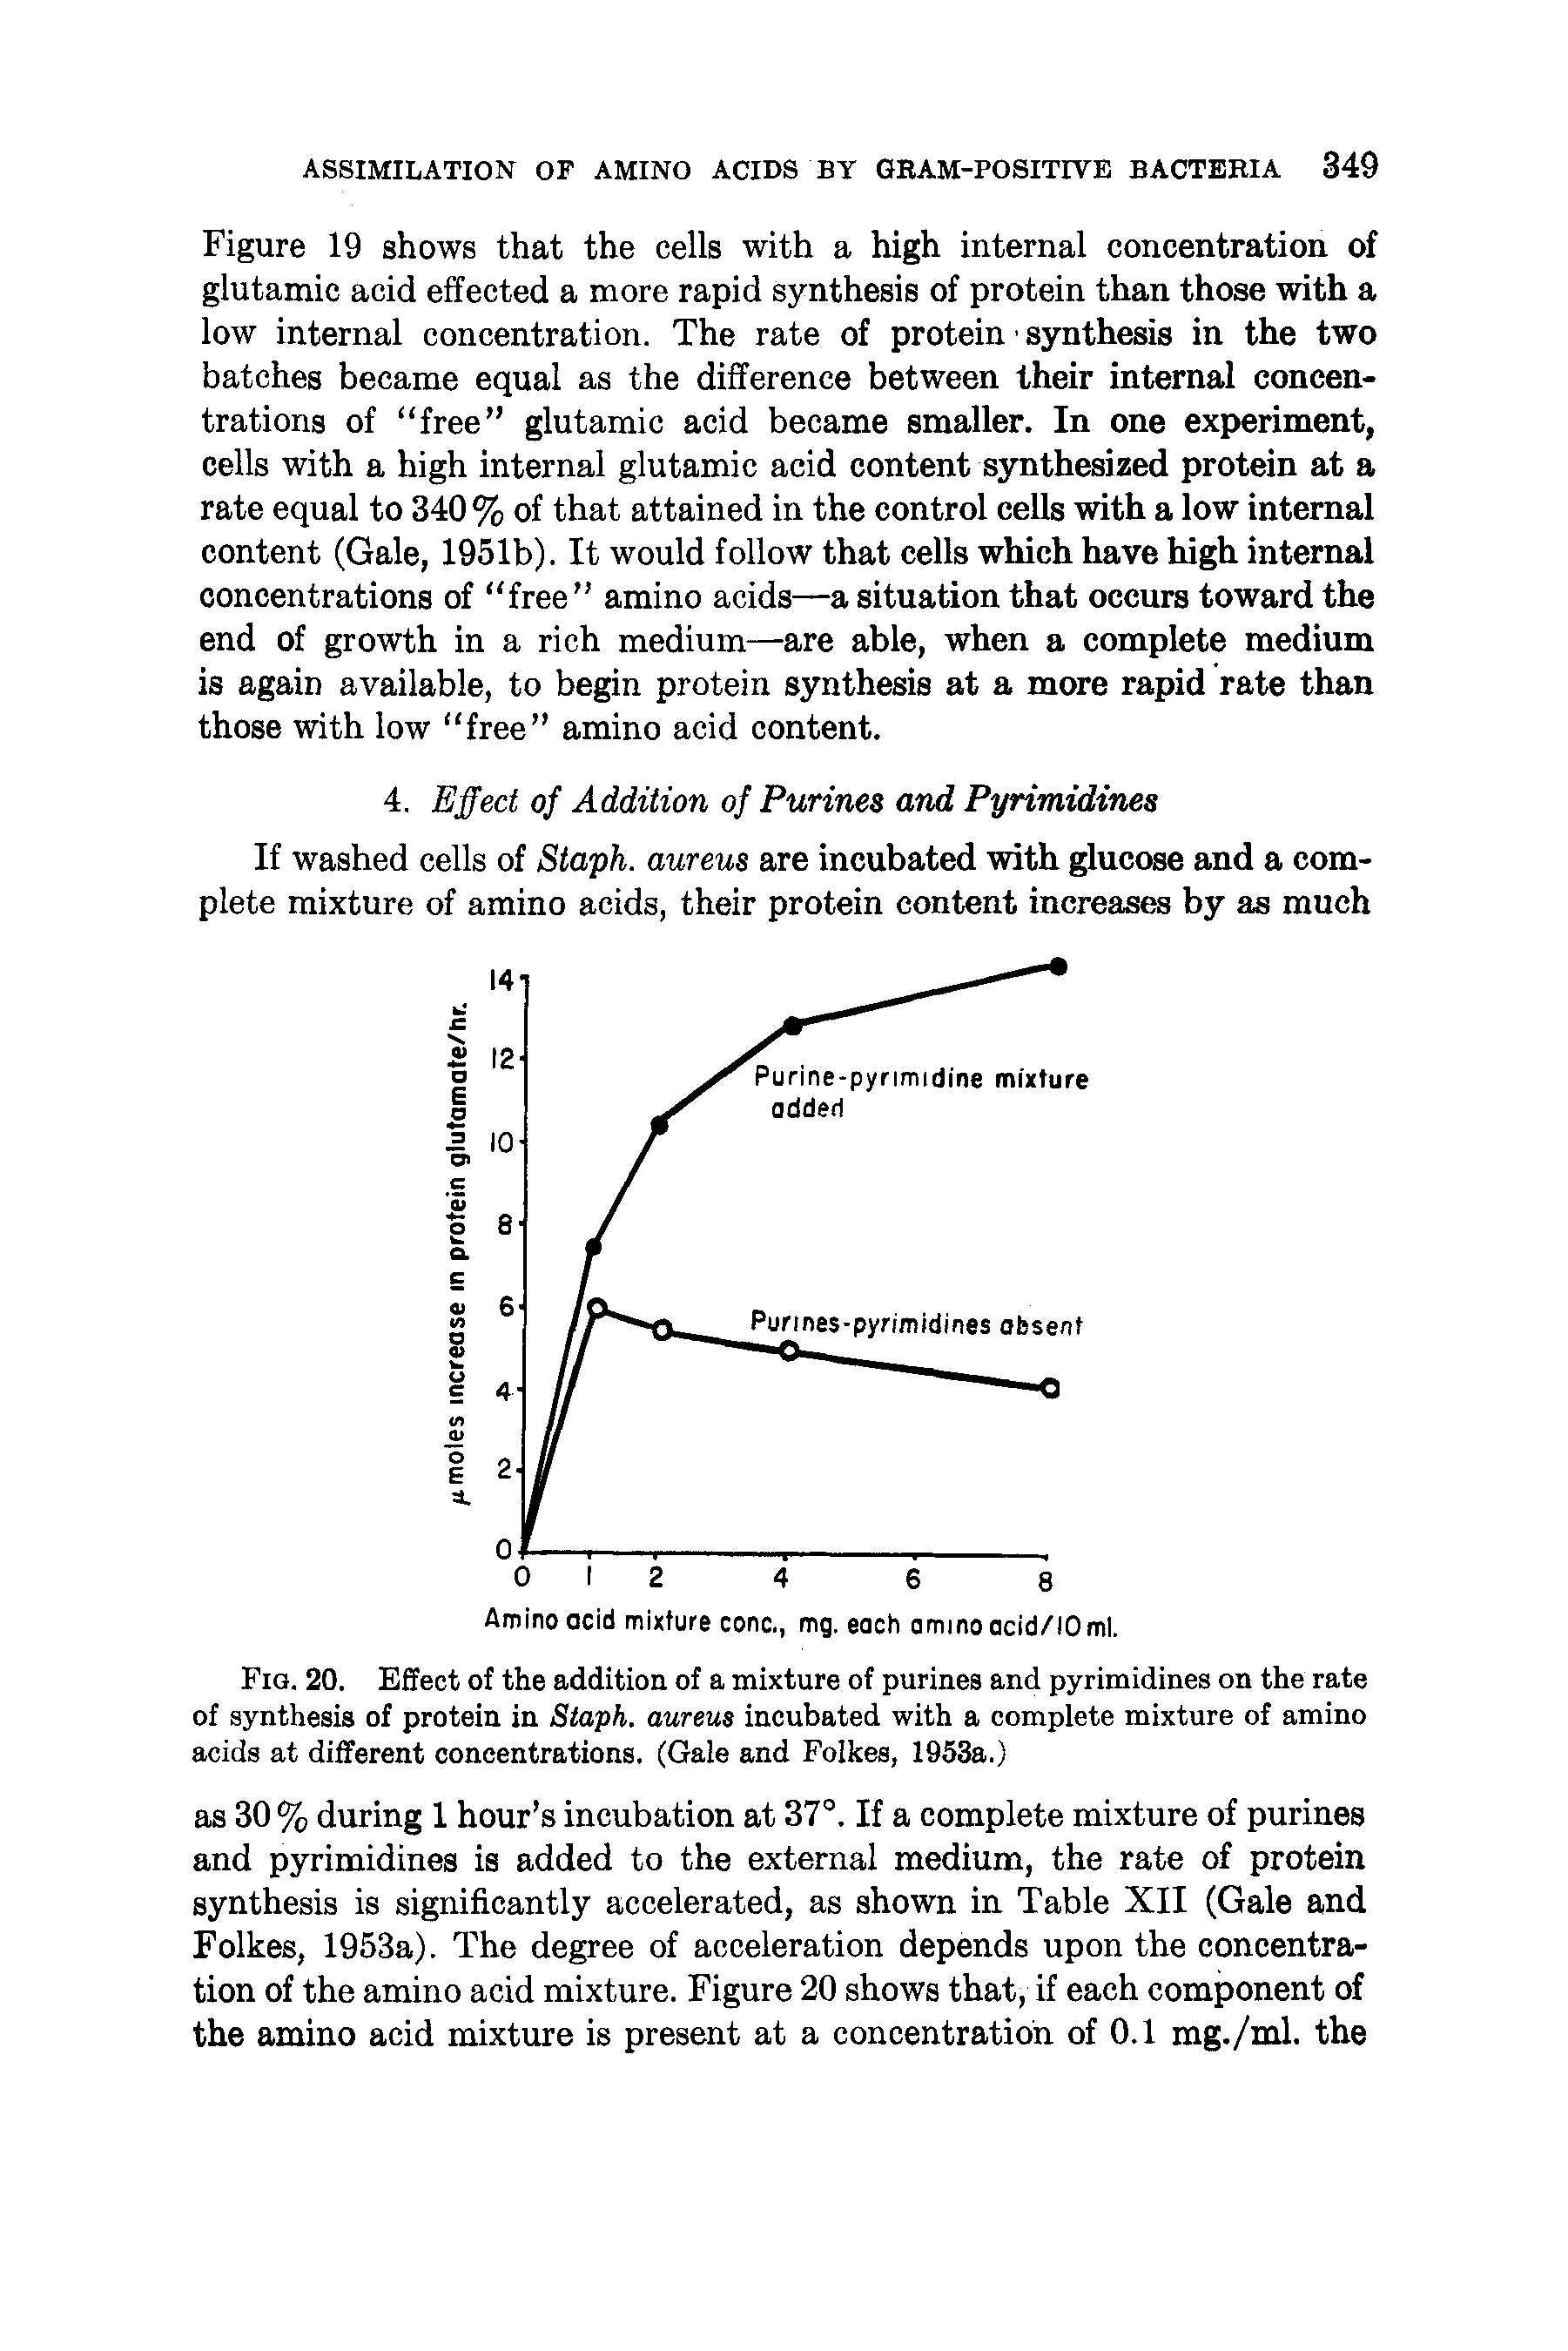 Fig. 20. Effect of the addition of a mixture of purines and pyrimidines on the rate of synthesis of protein in Staph, aureus incubated with a complete mixture of amino acids at different concentrations. (Gale and Folkes, 1953a.)...